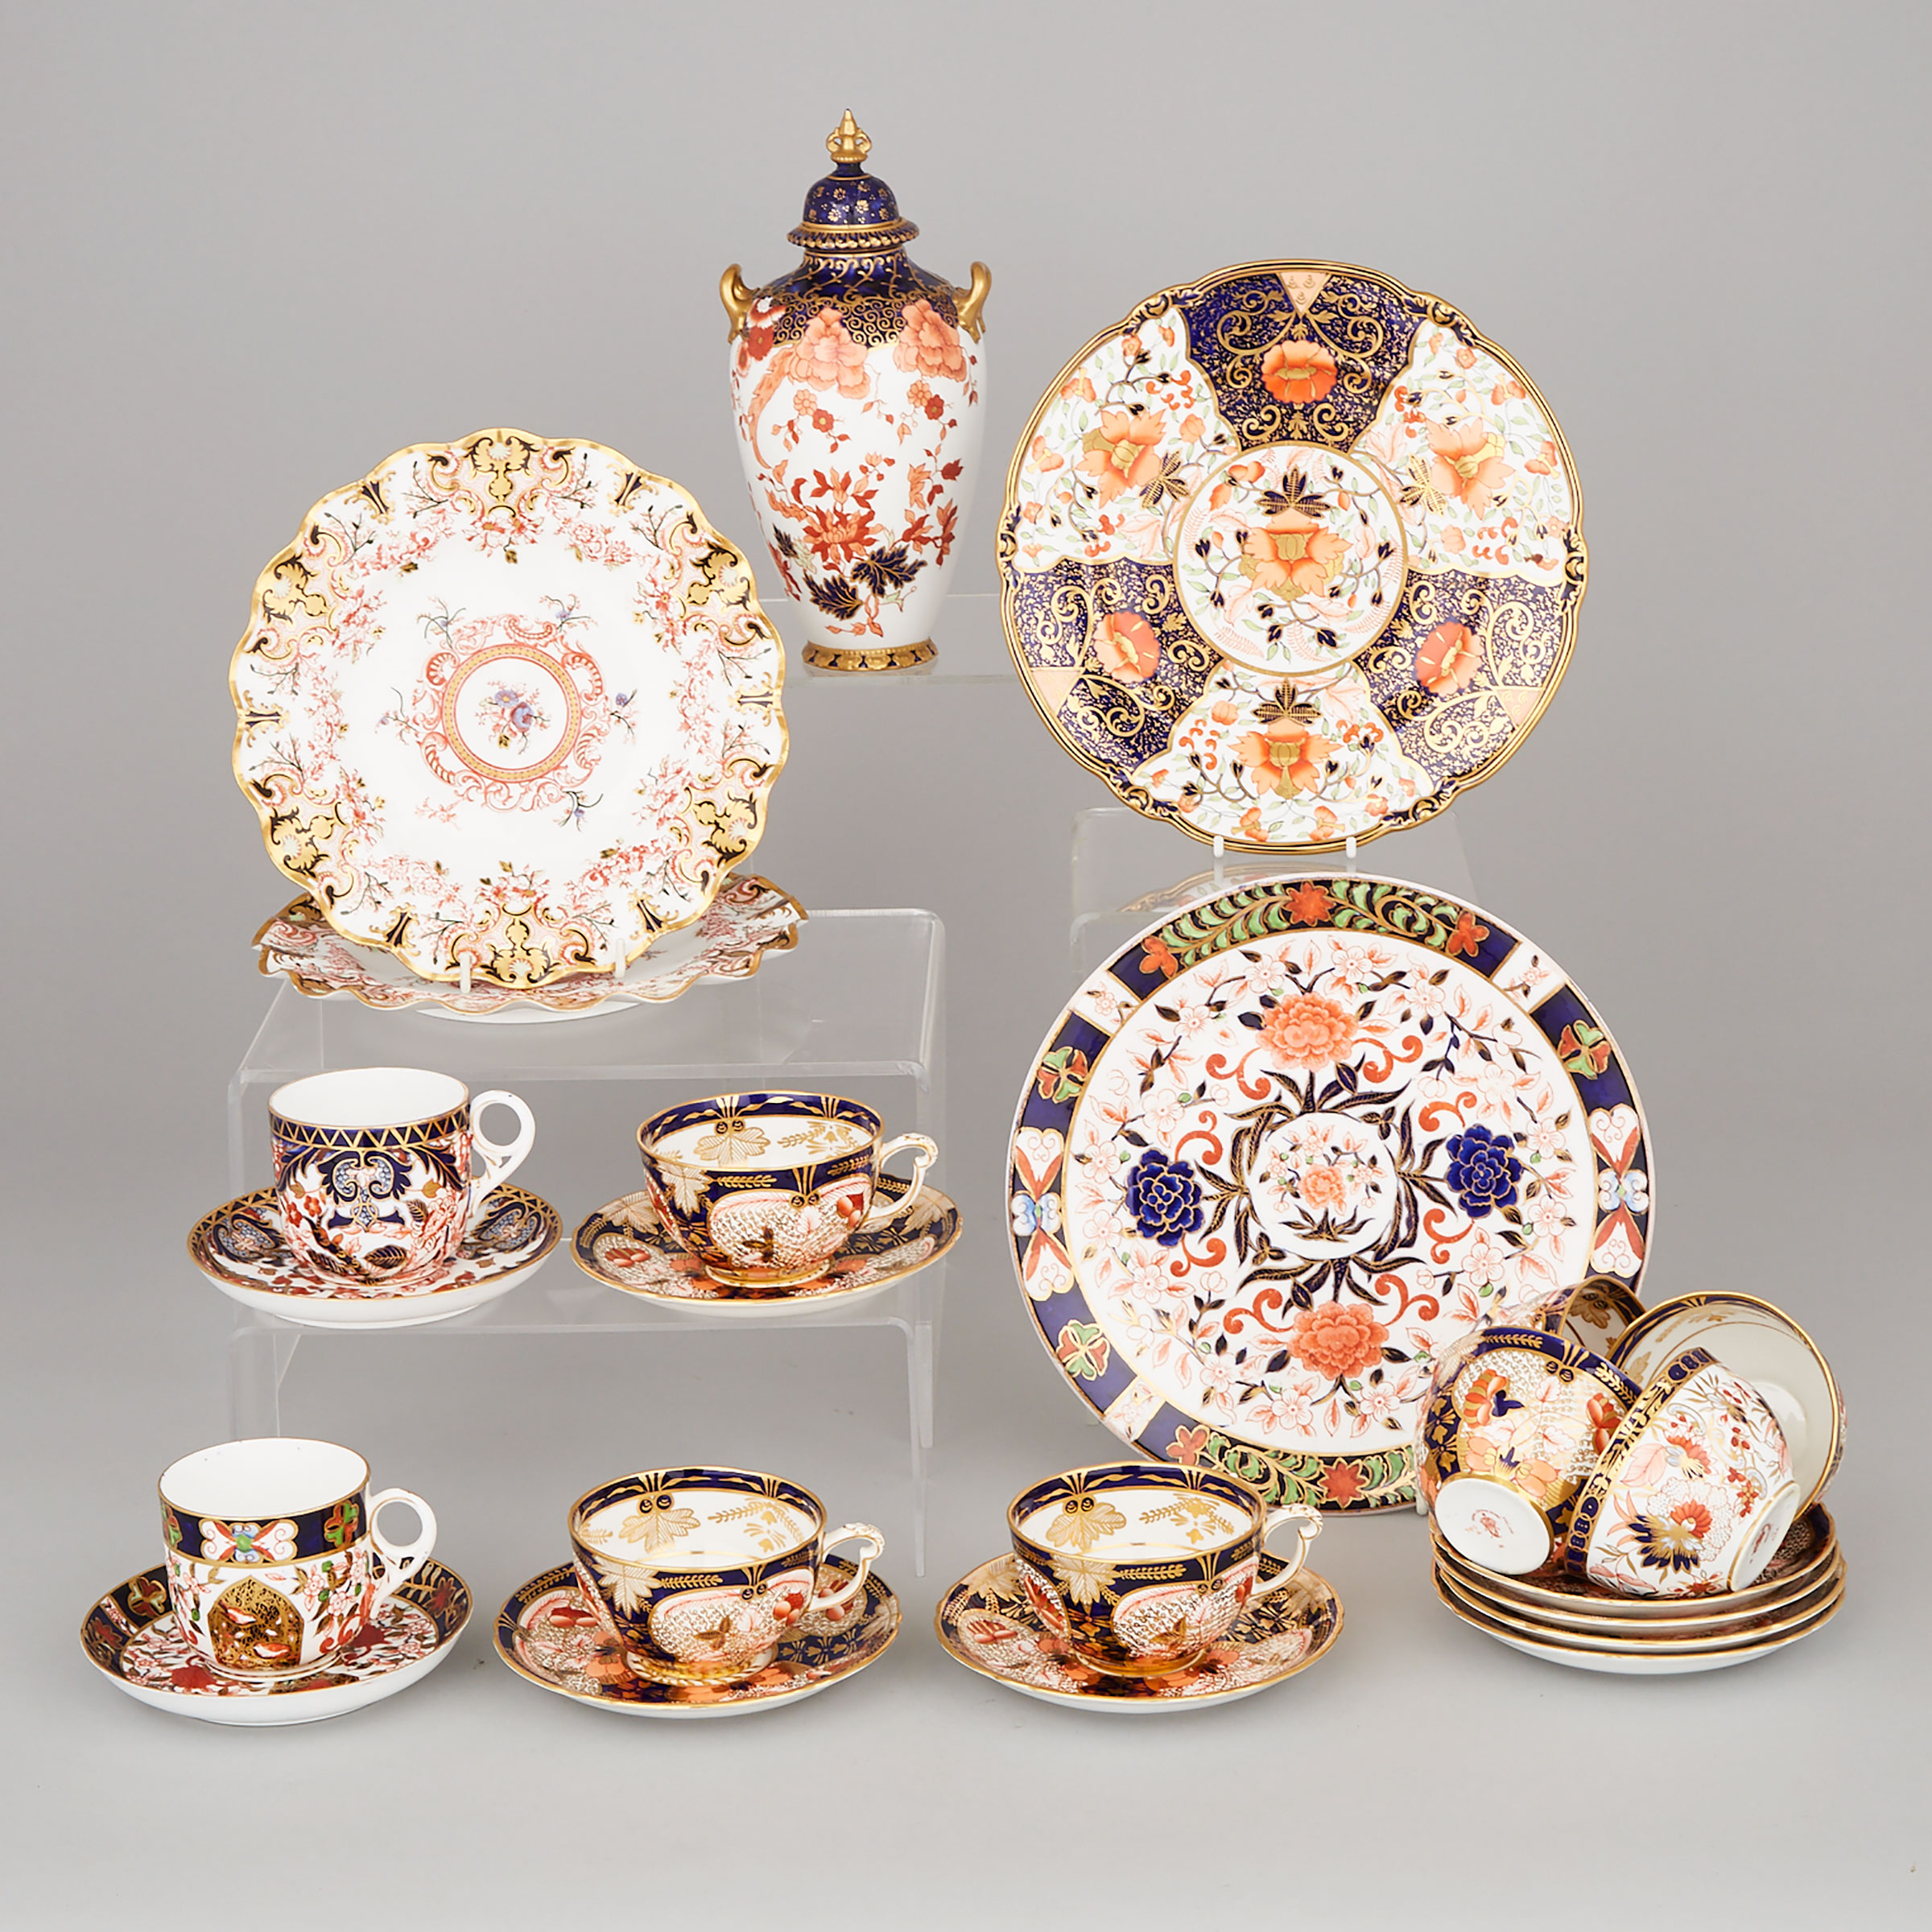 Group of Royal Crown Derby Tablewares, late 19th/early 20th century